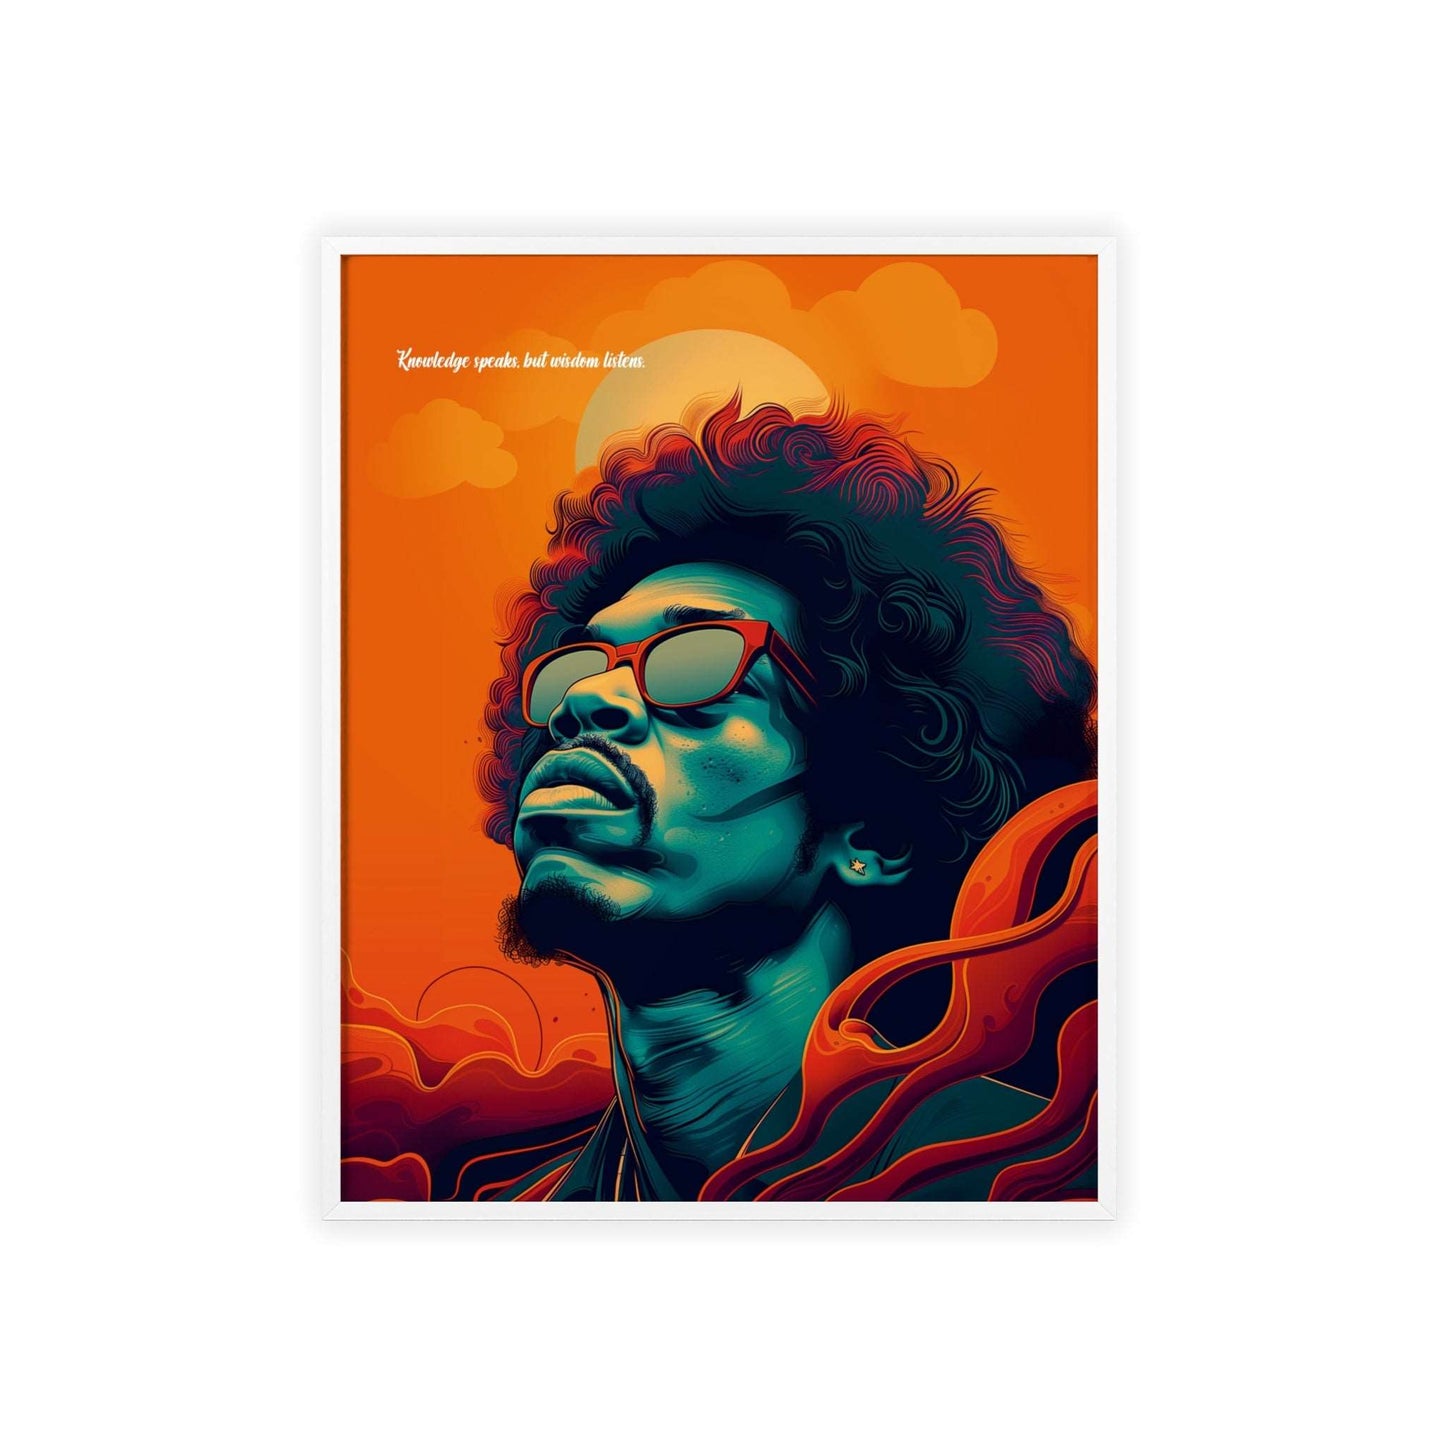 Original wall art with Jimi Hendrix's quote: 'The Knowledge speaks but Wisdom listens,' perfect for adding inspiration and style to your home decor.